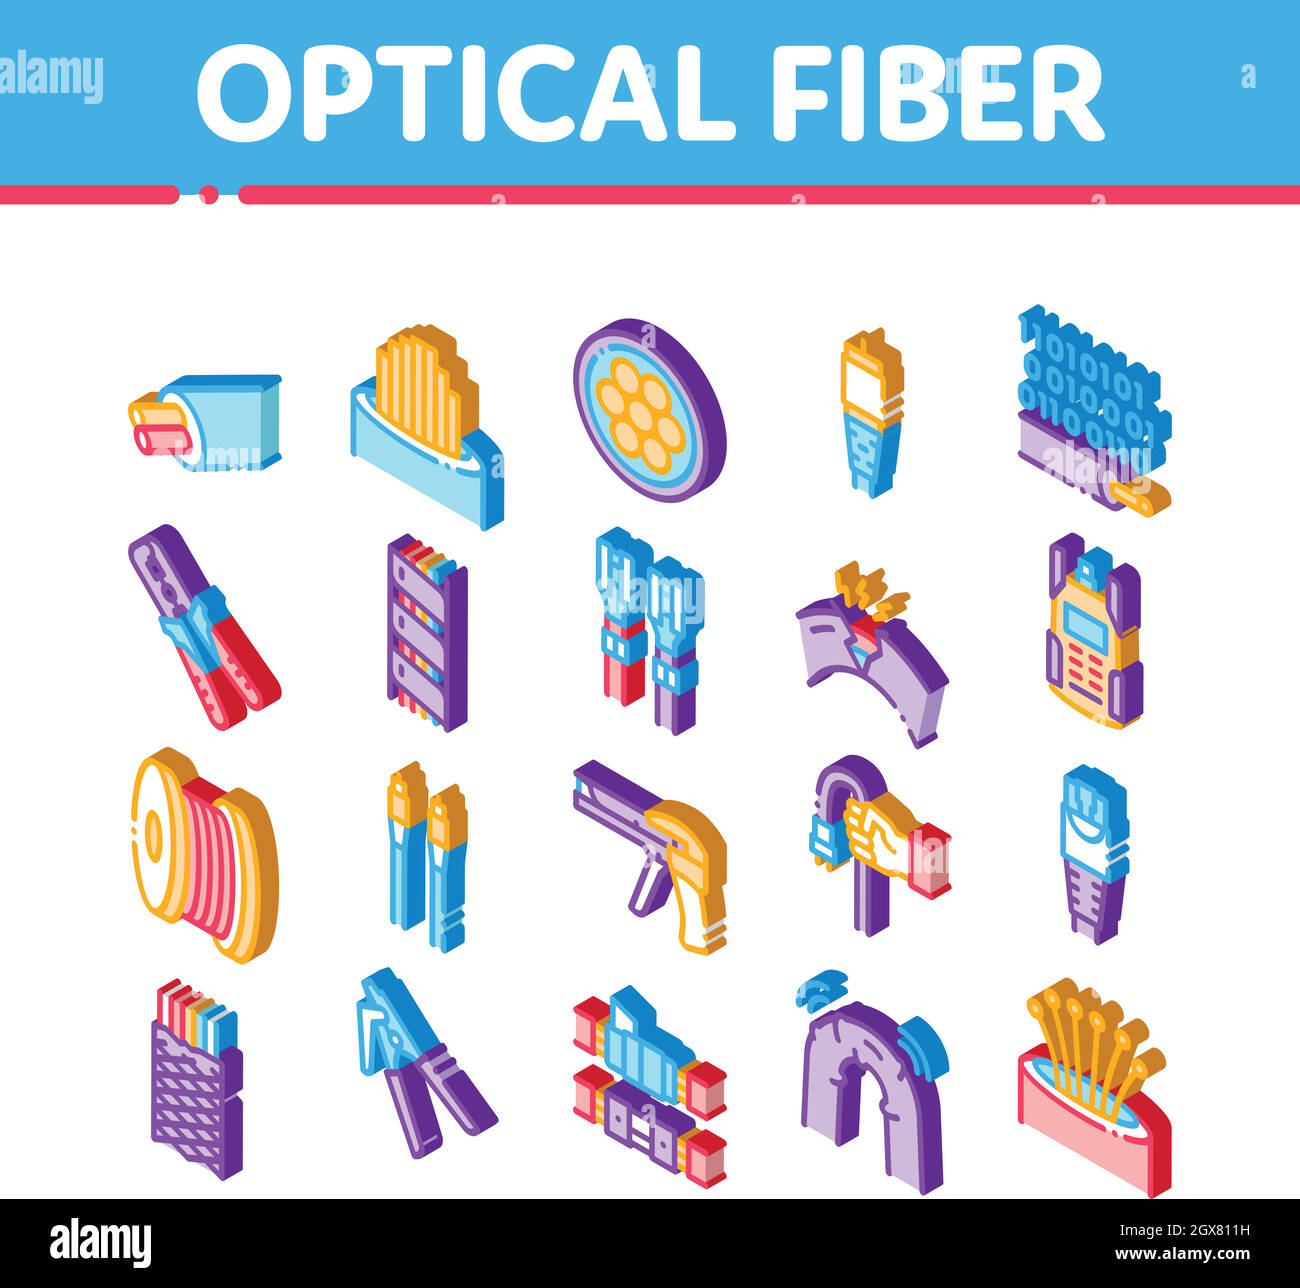 Optical Fiber Cable Isometric Icons Set Vector Stock Vector